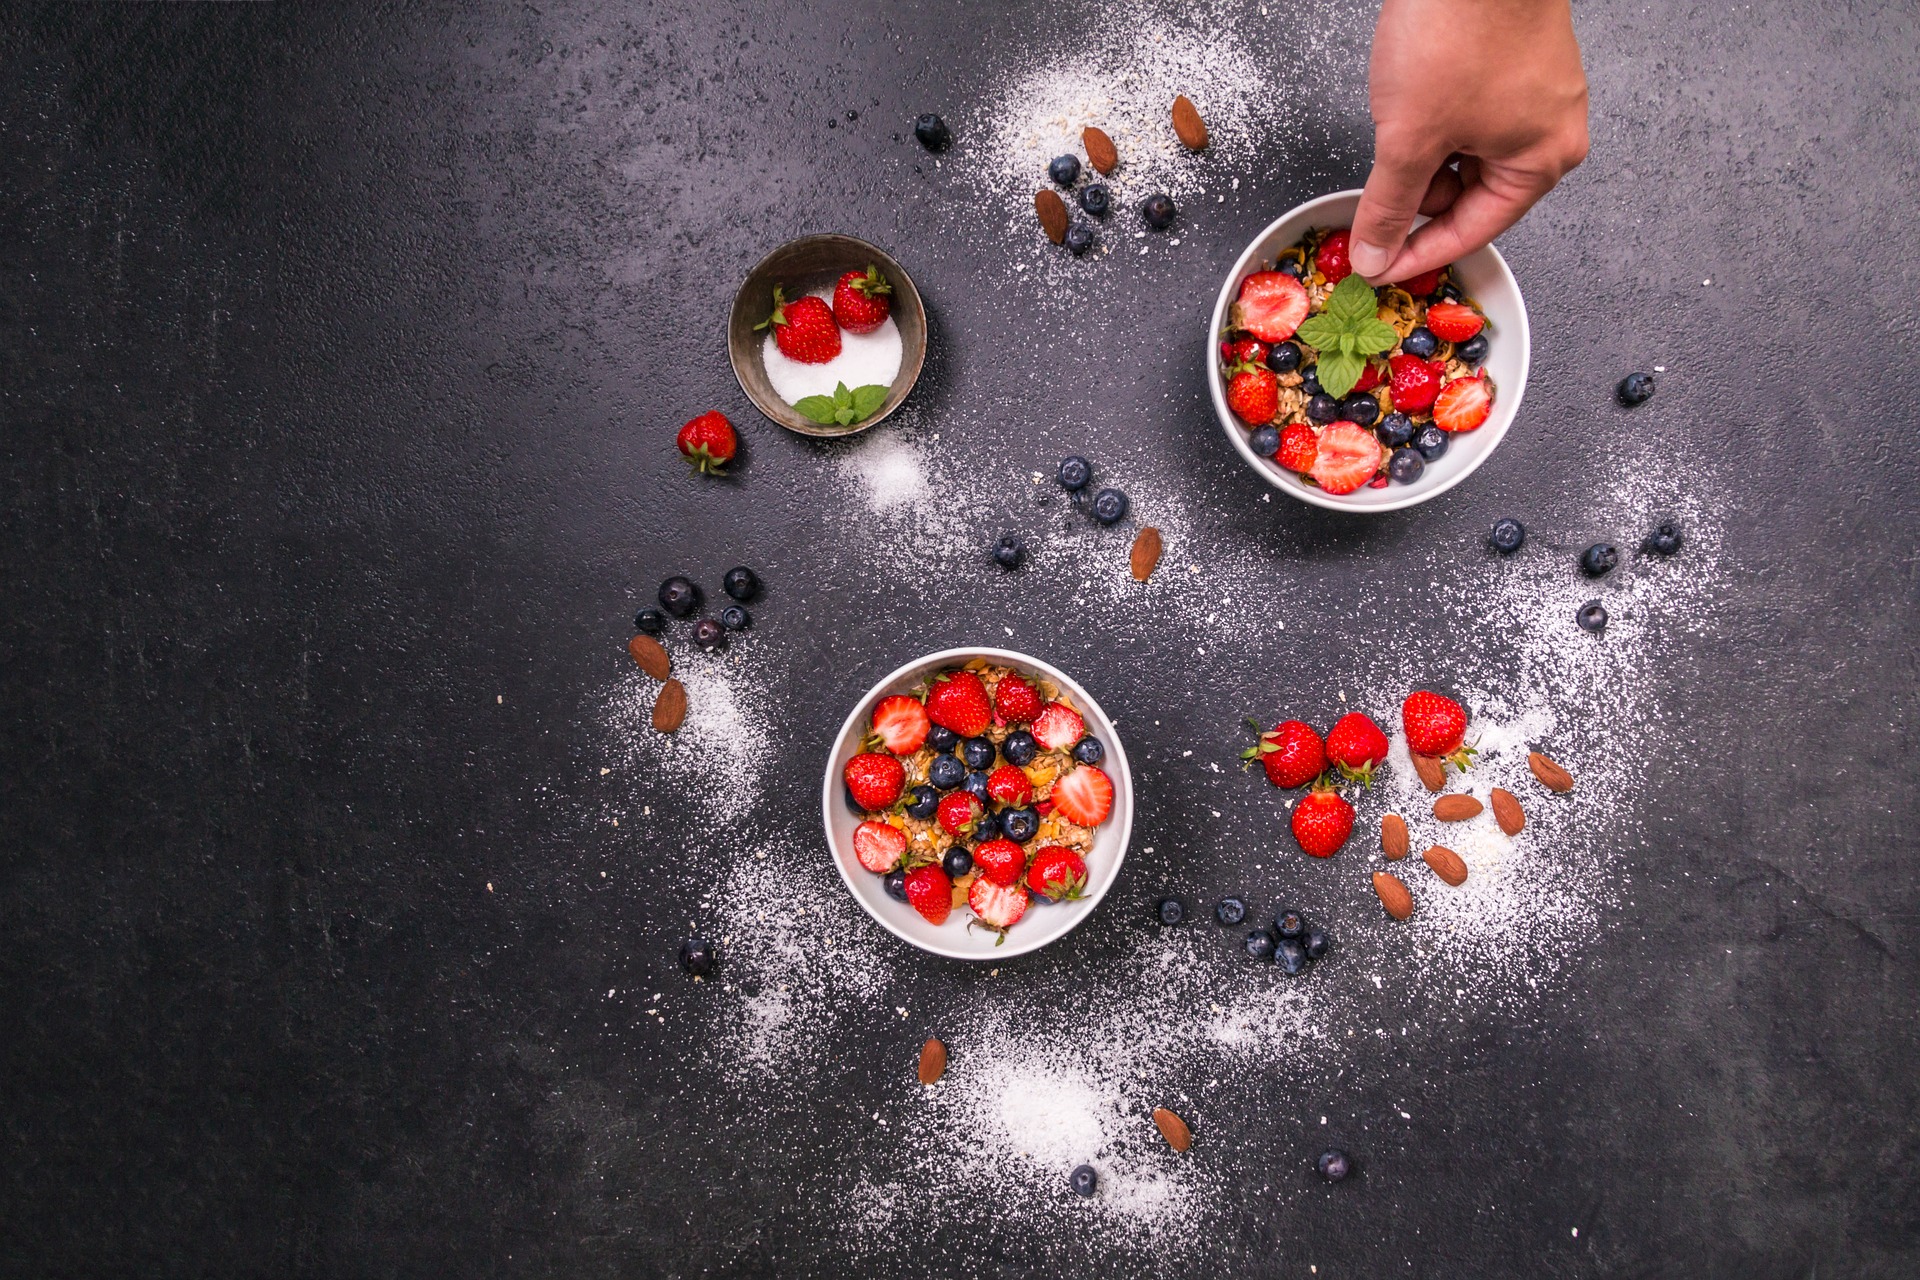 Hands reaching towards some small bowls of berries and cereal on a dark surface